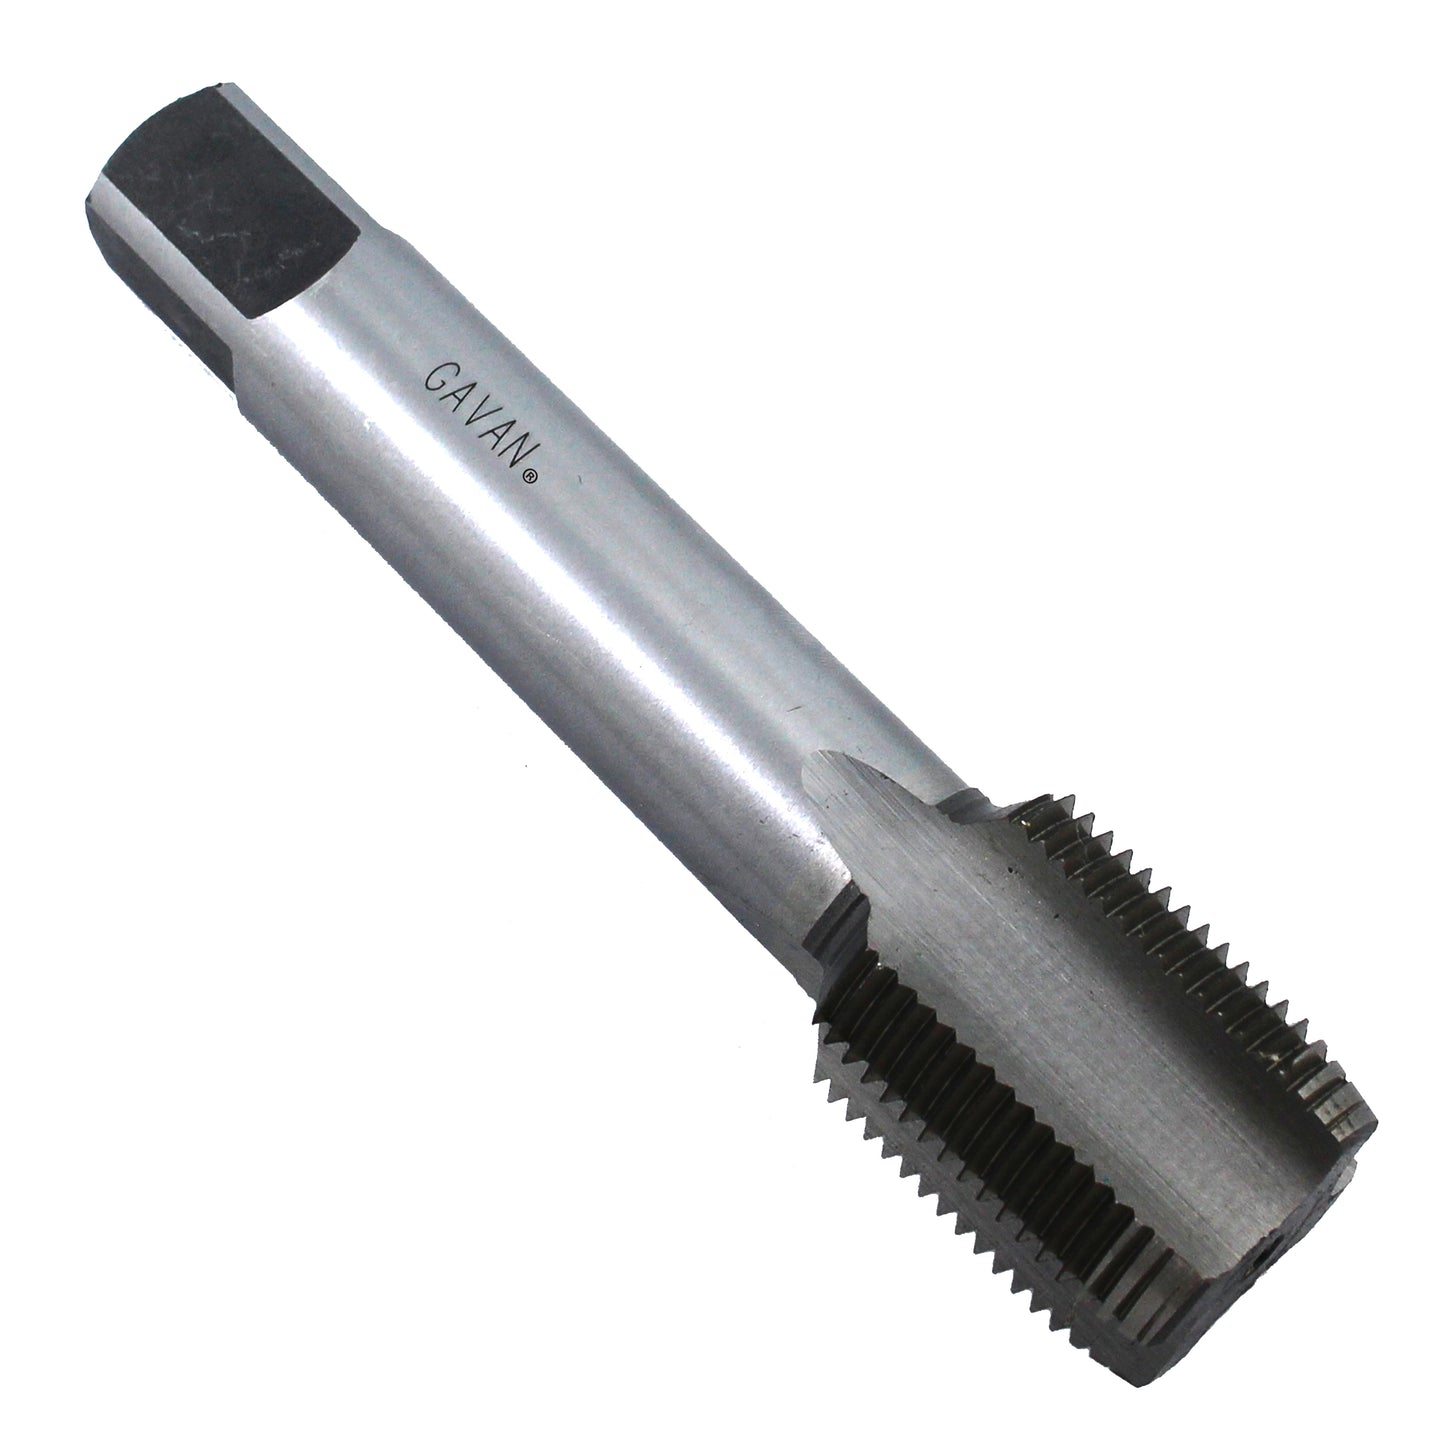 1 3/4" - 14 HSS Unified Right Hand Thread Tap